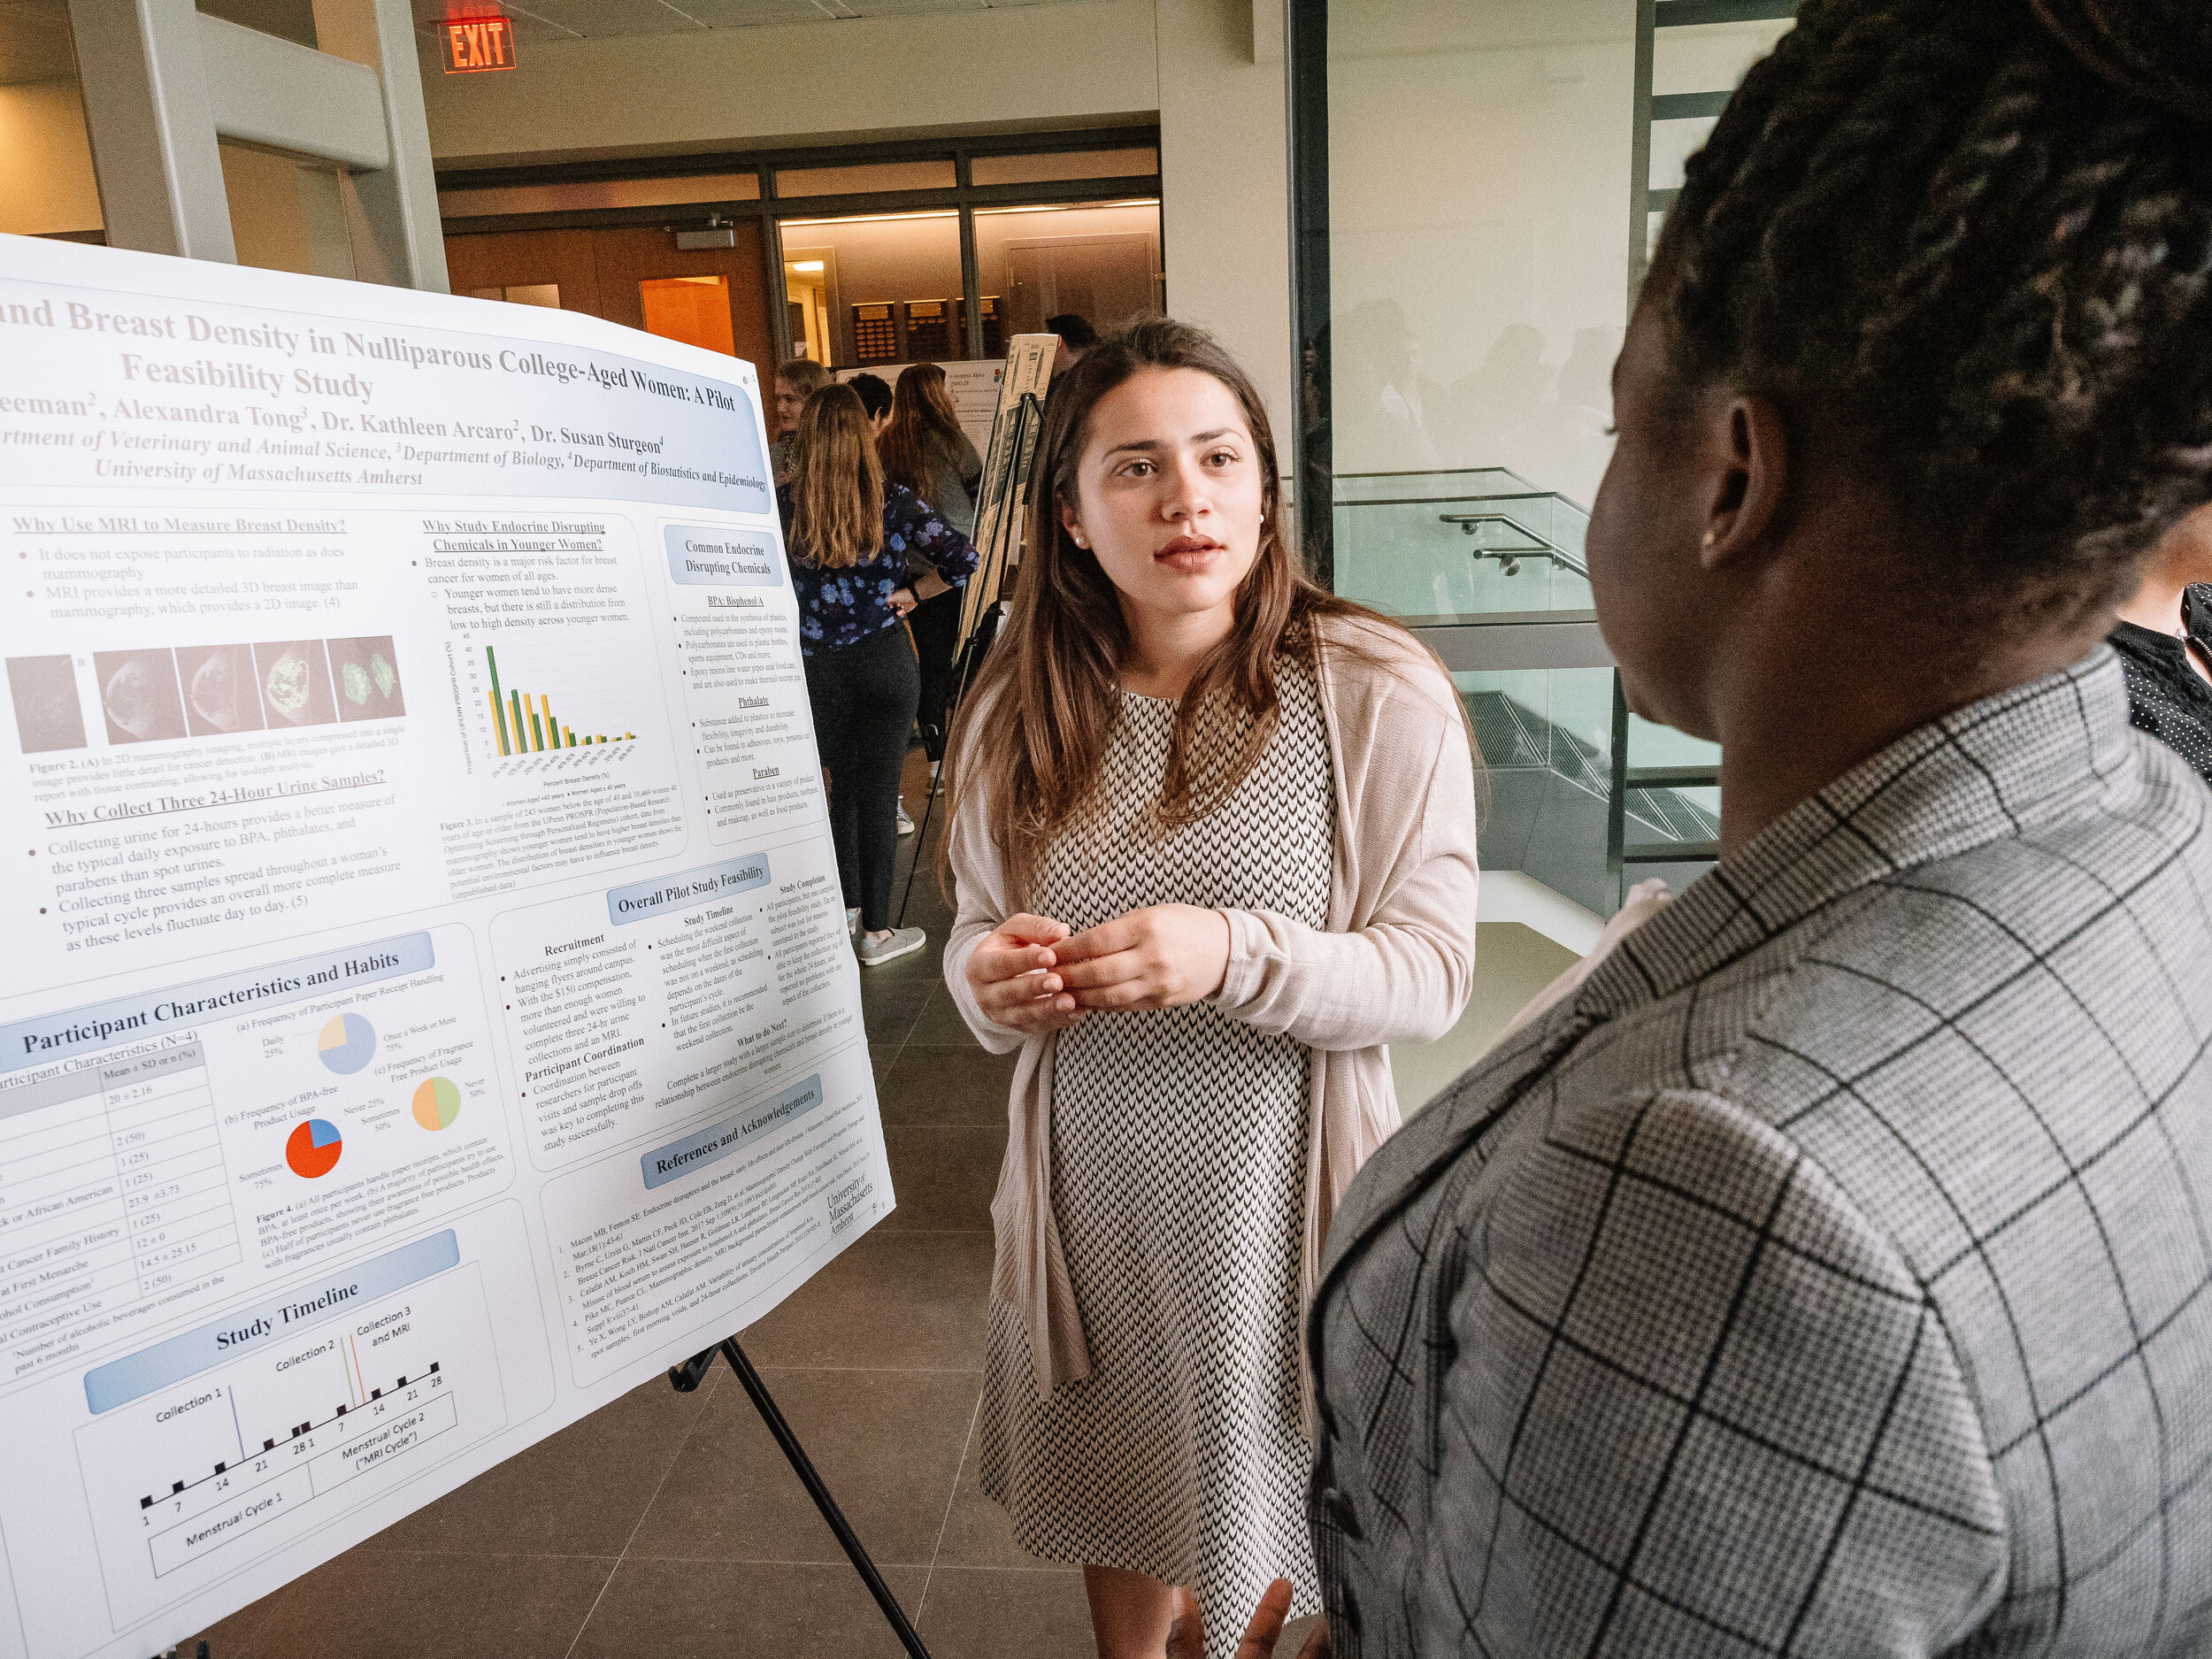  UMass Veterinary & Animal Sciences held Science Day in the Integrated Sciences Building on Thursday, May 2, 2019. (Photo by Judith Gibson-Okunieff) 